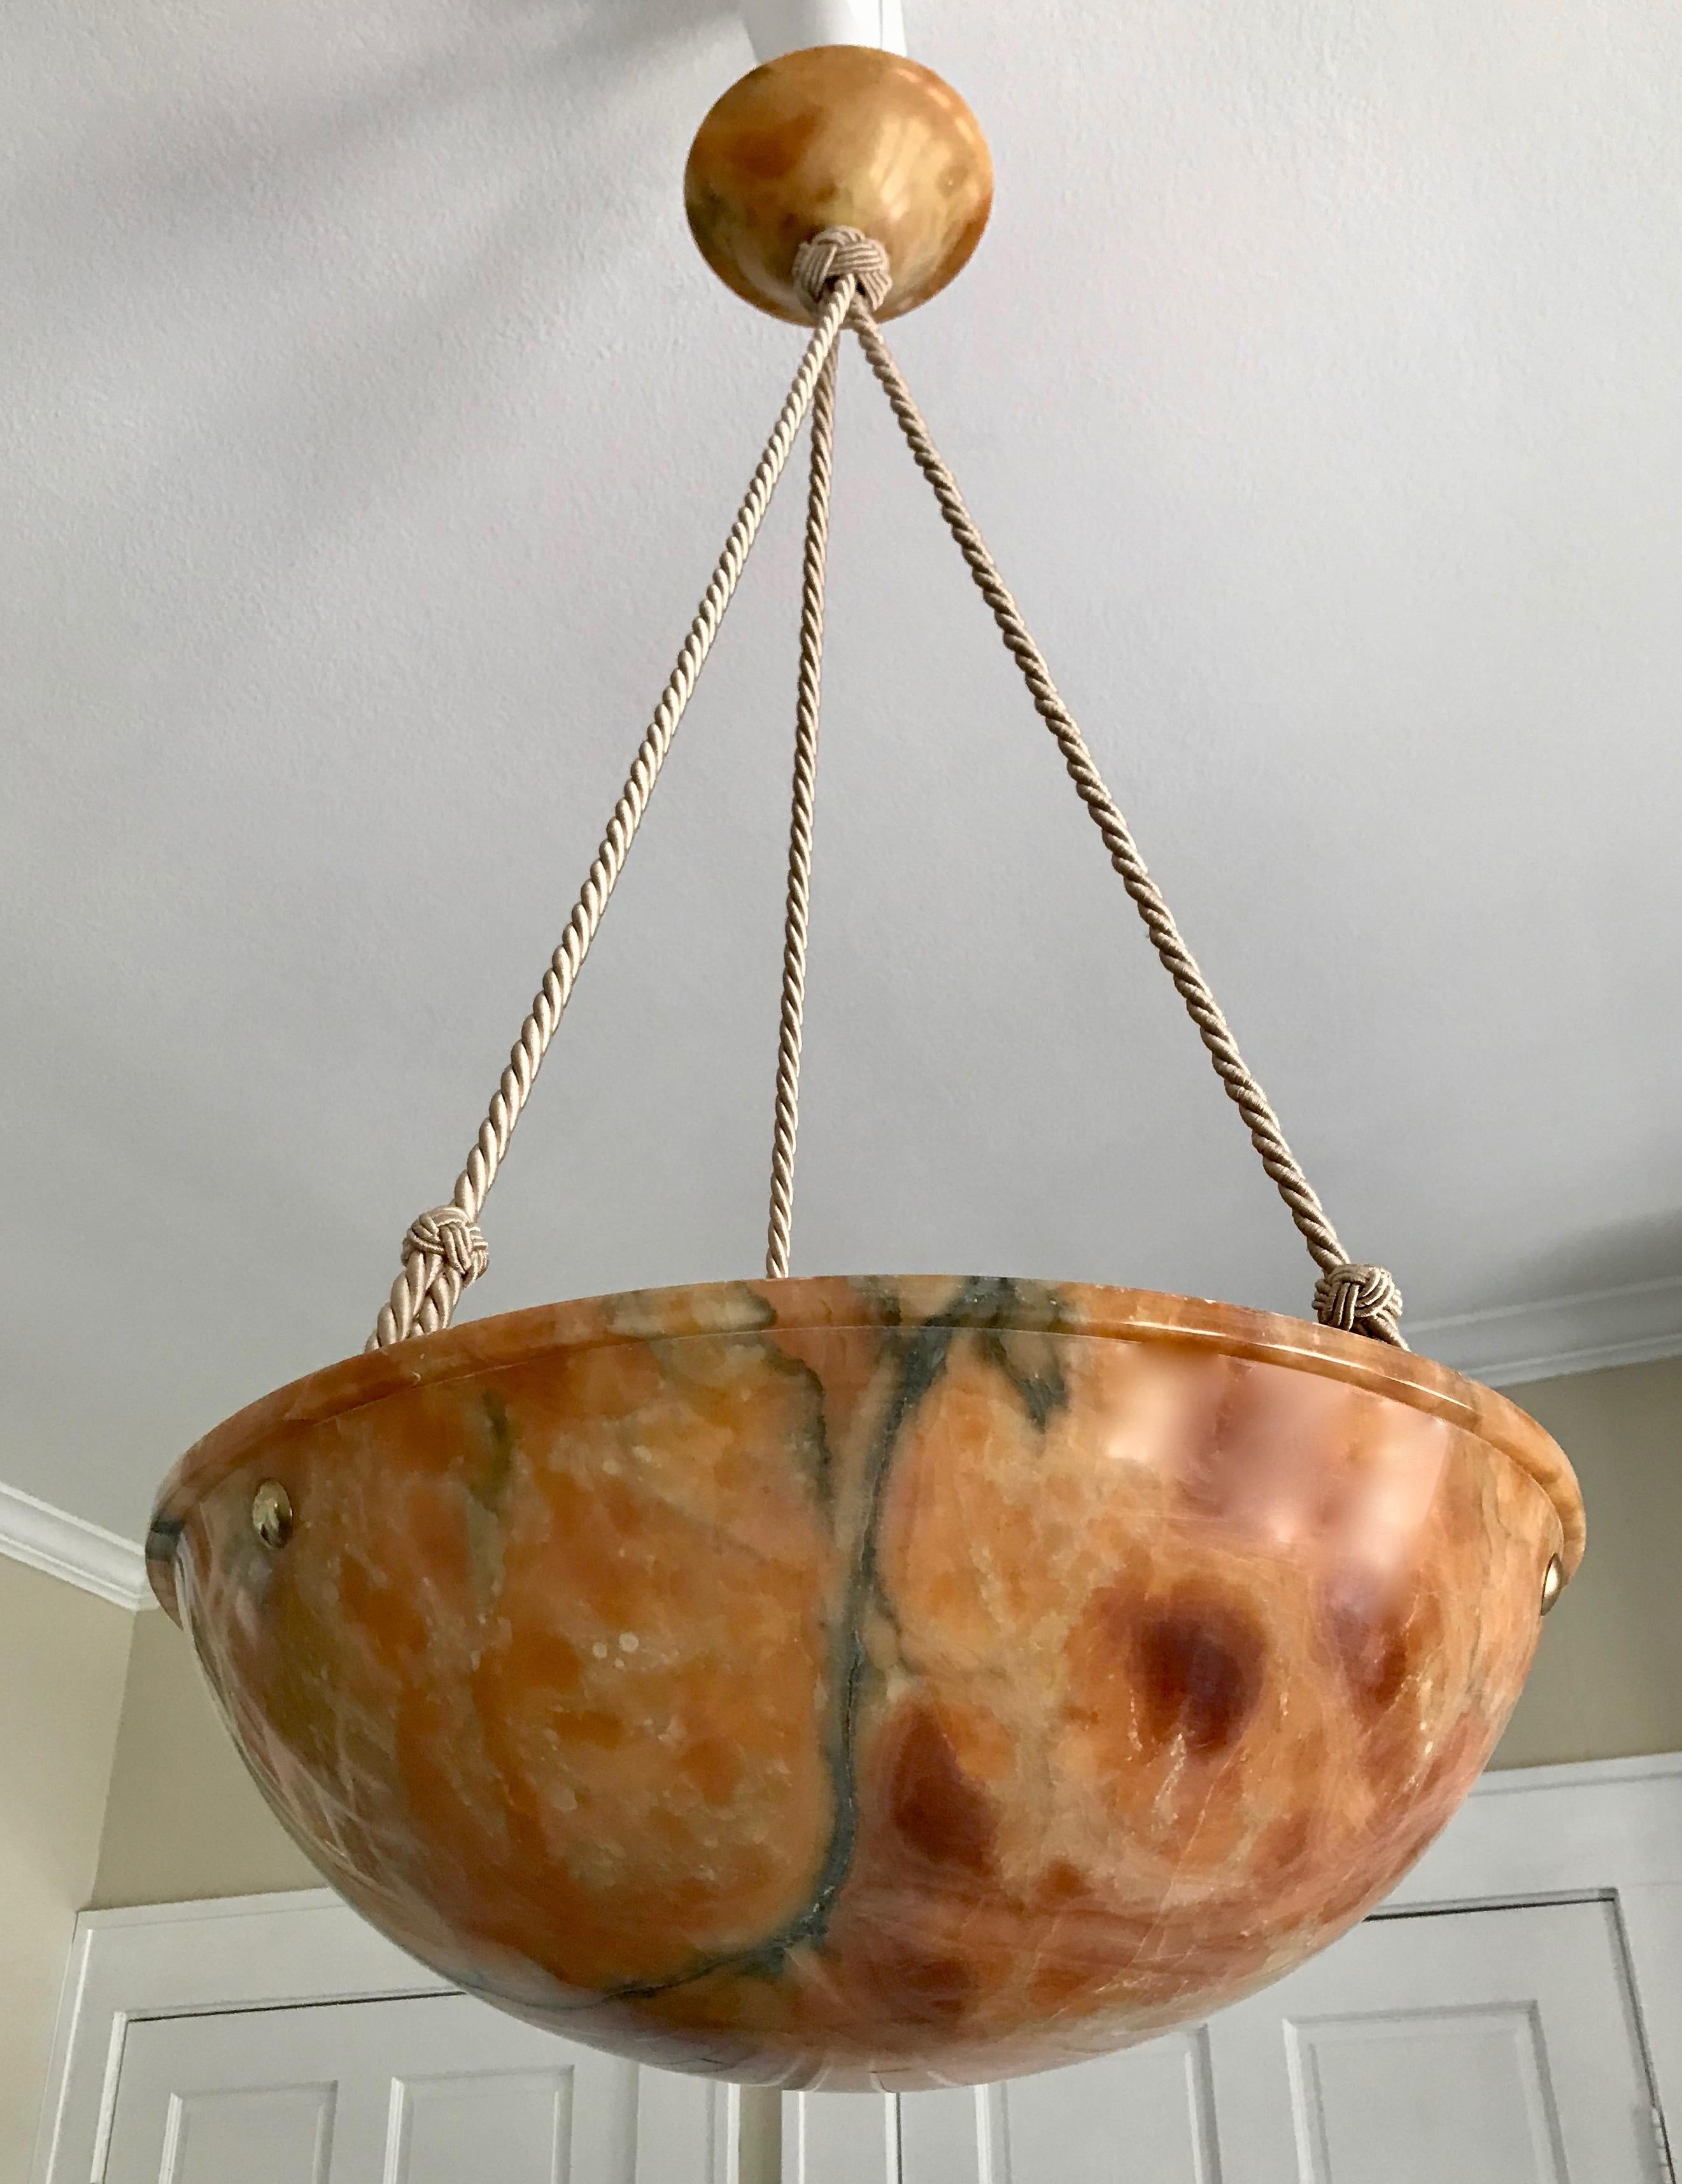 Stunning French alabaster pendant light or chandelier with exceptional figuring and movement in the amber or tortoise shell colored bowl. New custom interior fittings keep bulbs away from the alabaster and provide a more even light. Recently wired